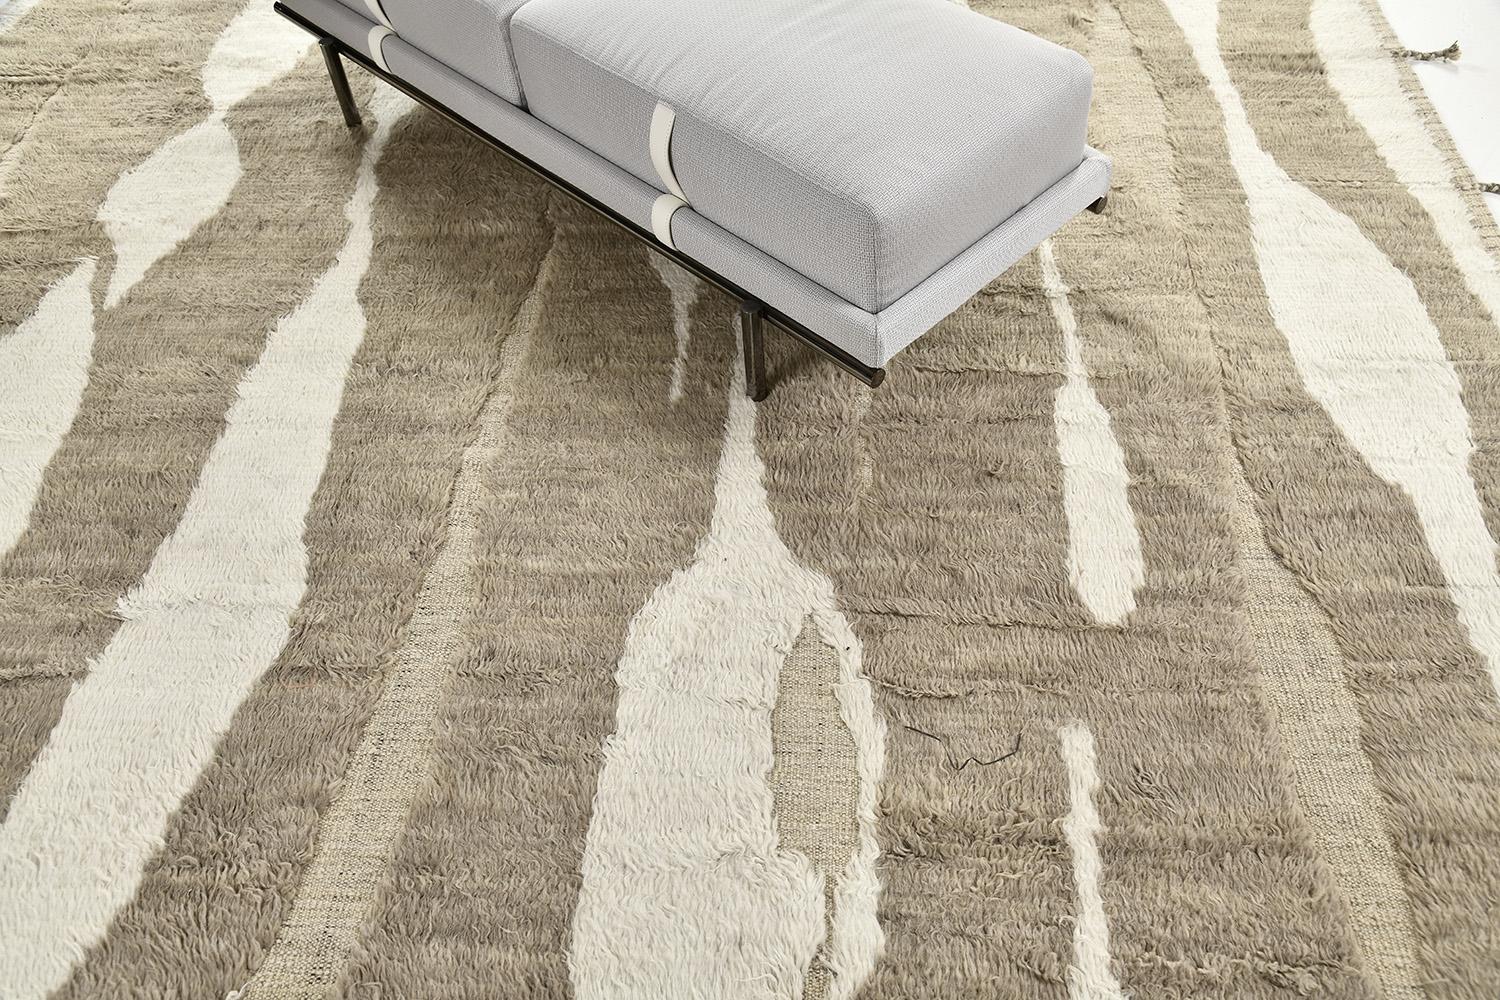 Fengfeng is made of luxurious wool and is made of timeless design elements. It's weaving of natural earth tones and unique embossed design is what makes the Haute Bohemian collection the signature collection of California. This rug, designed in Los